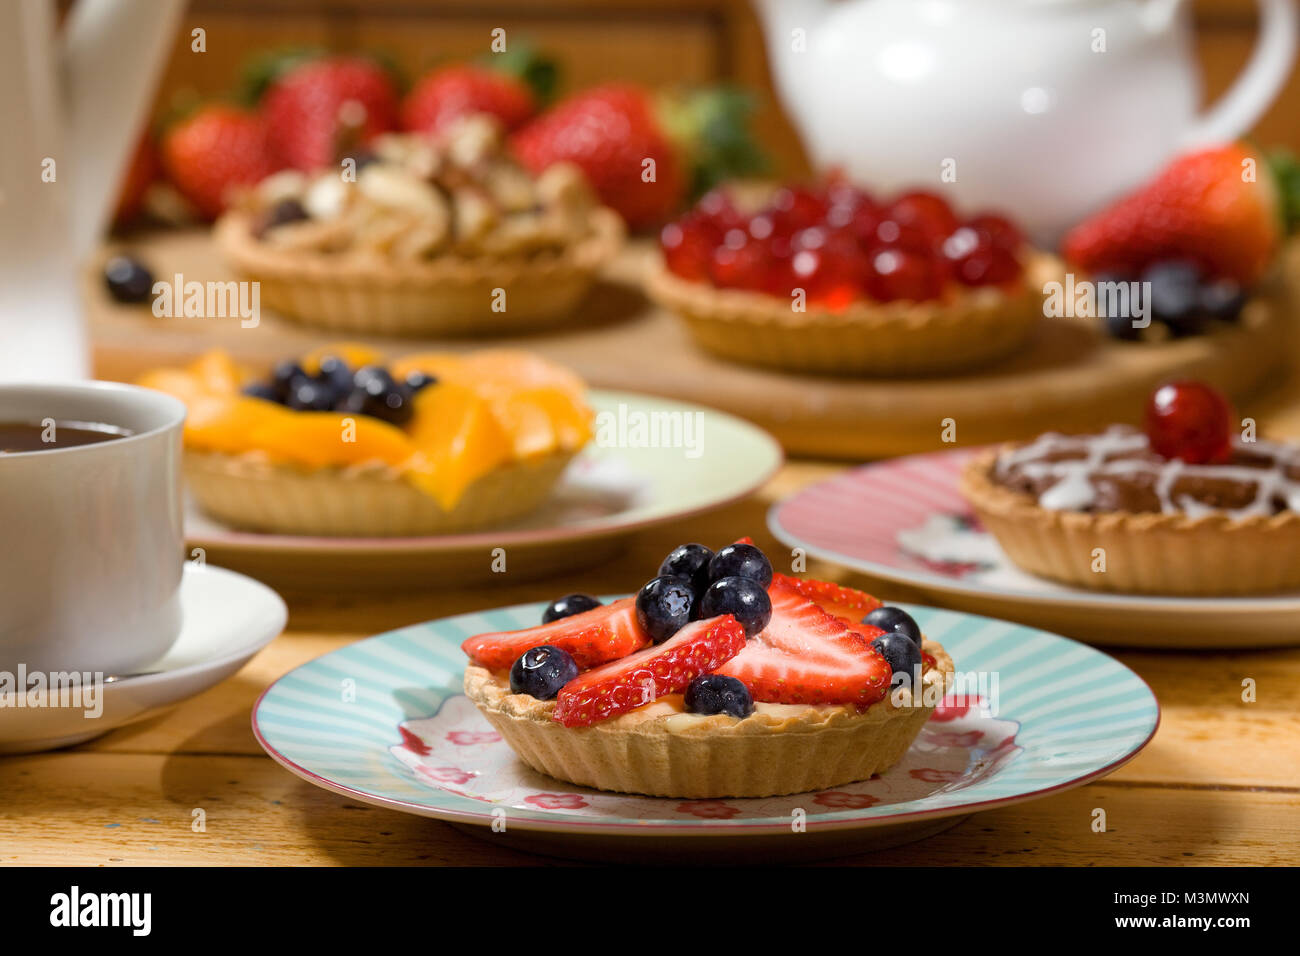 Strawberry and blueberry tart with a selection of fruit tarts in the background Stock Photo